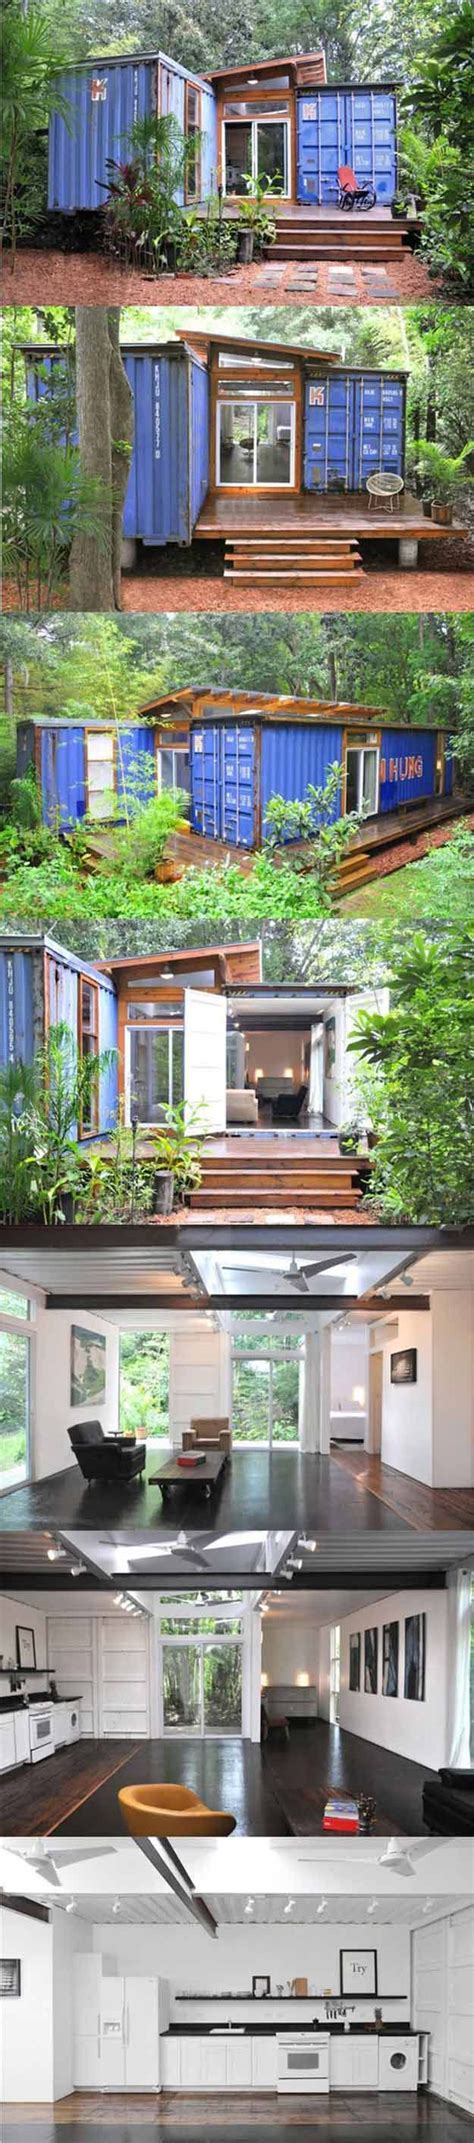 17 Cool Container Homes To Inspire Your Own Building A Container Home